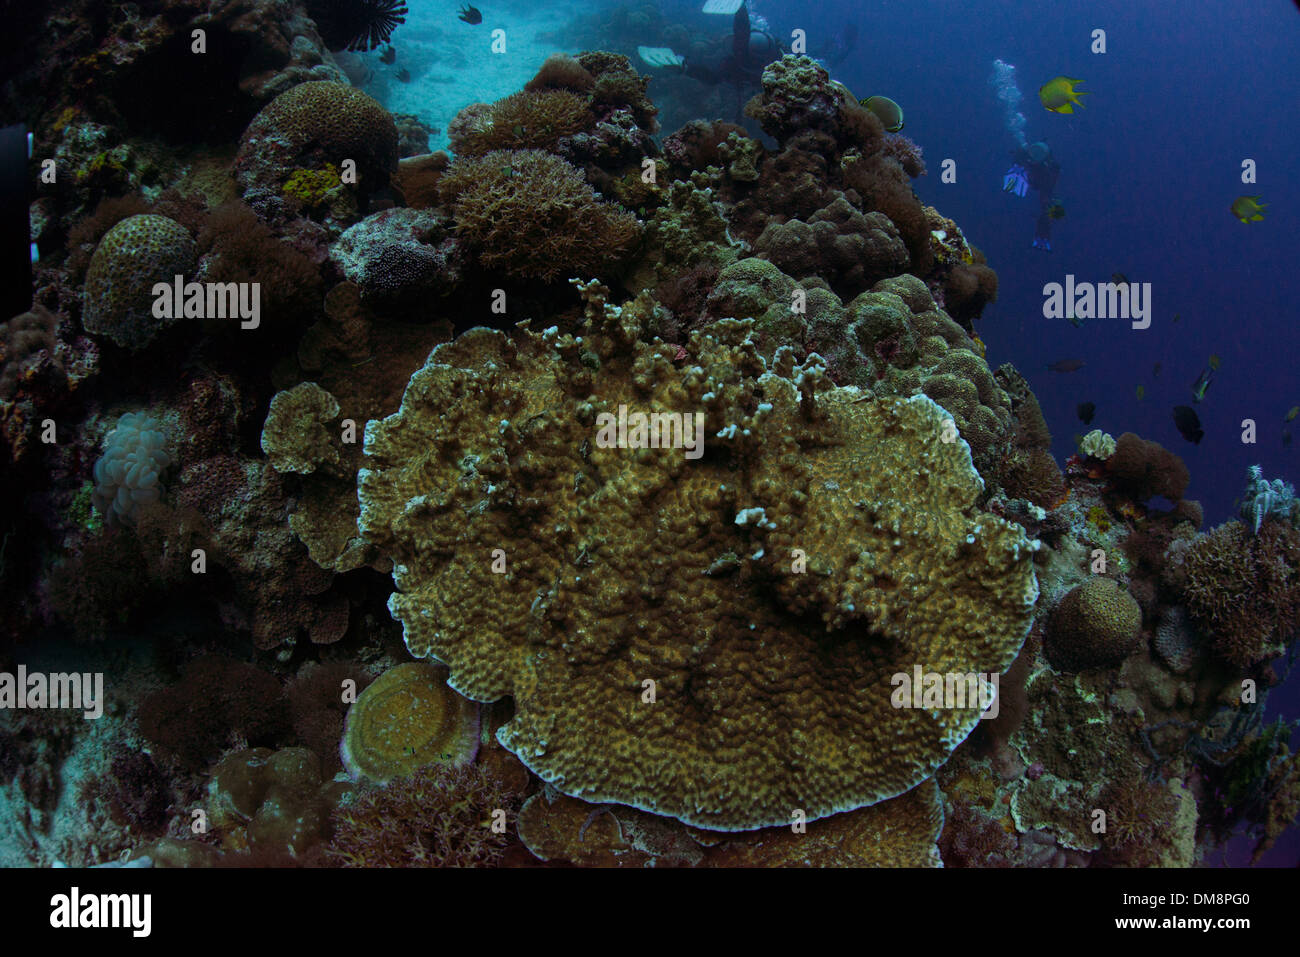 Underwater landscape with corals, fish and divers Stock Photo